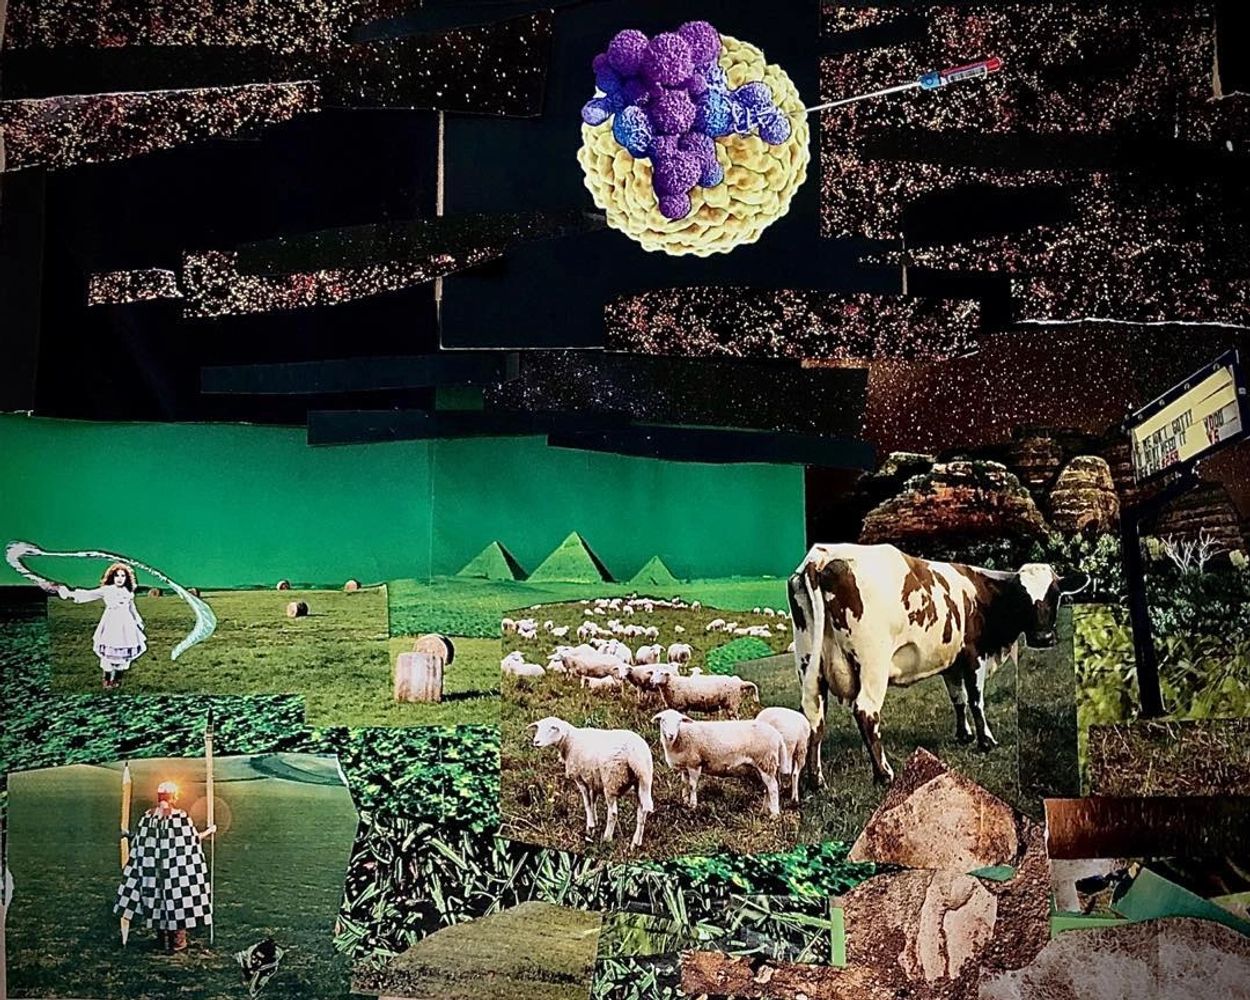 Collage by Emily Sheppard May 2020 "Welcome to  CoVoid"
